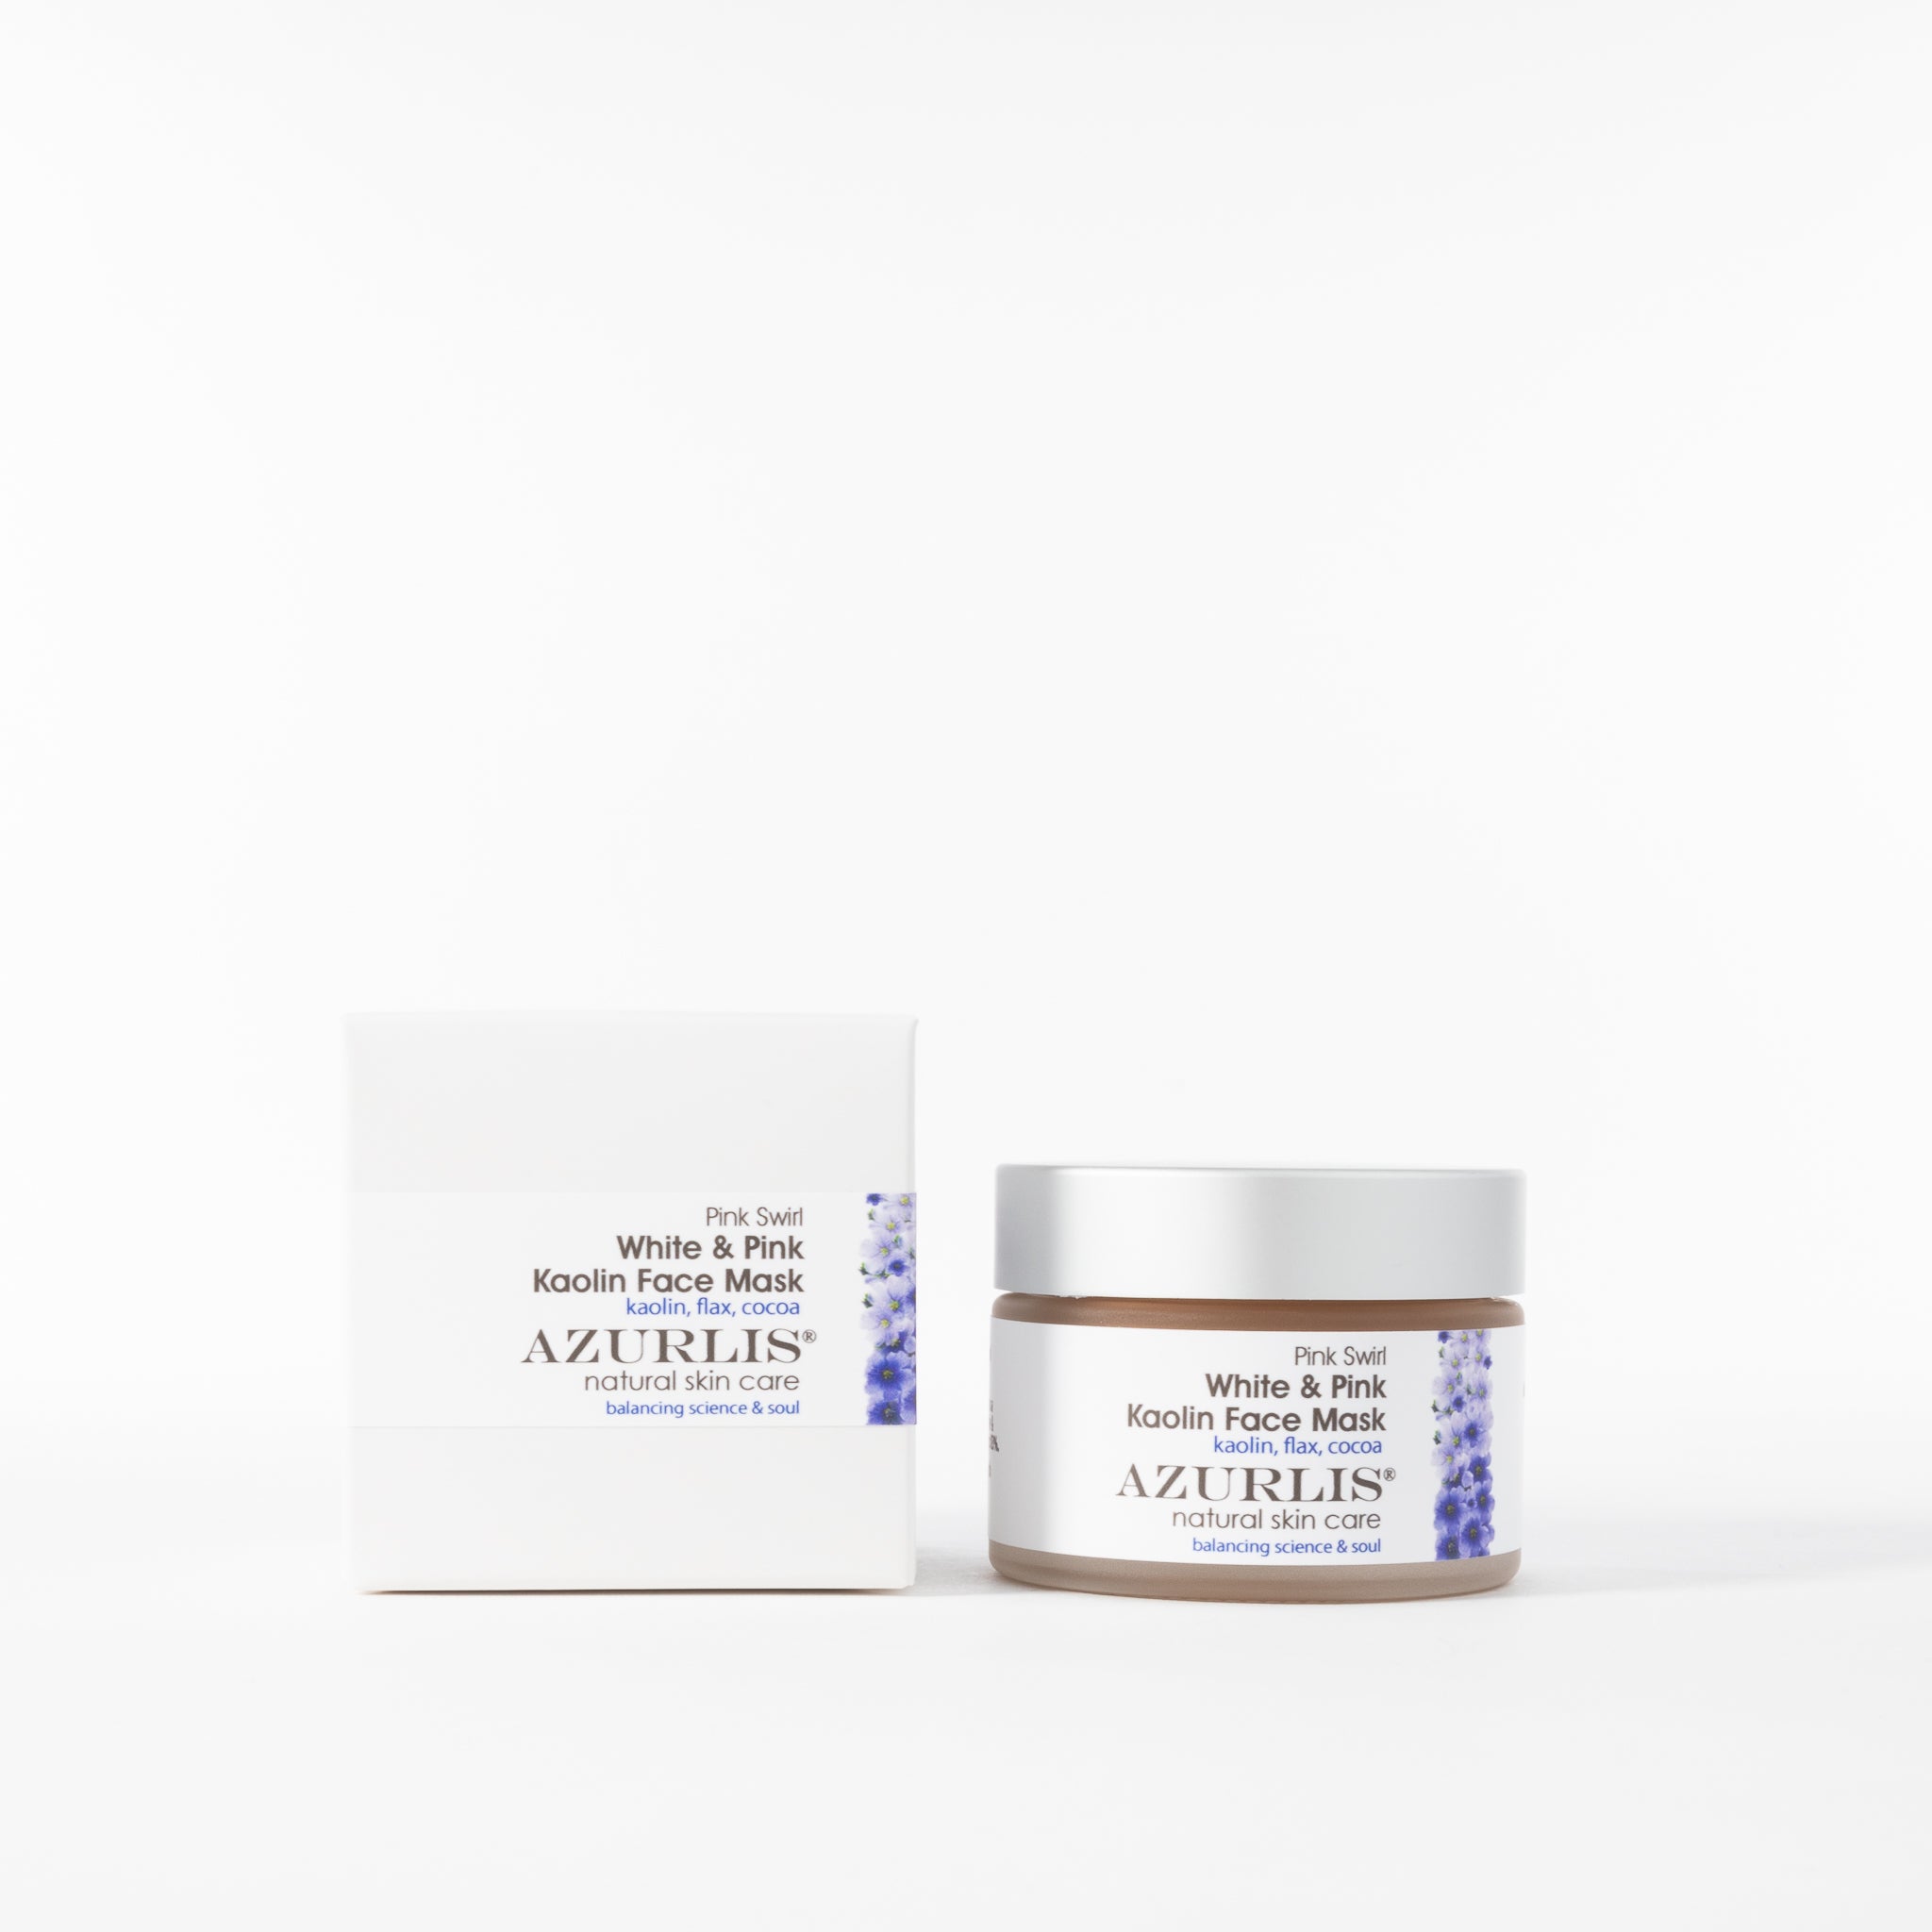 Azurlis™ Pink Swirl Kaolin Face Mask 50/30ml is a "wet mask", as it will not dry up on your skin, but provides a source of deep nourishing and balancing ingredients. Ideal for all types of skin, whether sensitive, fragile skin, or acne prone.